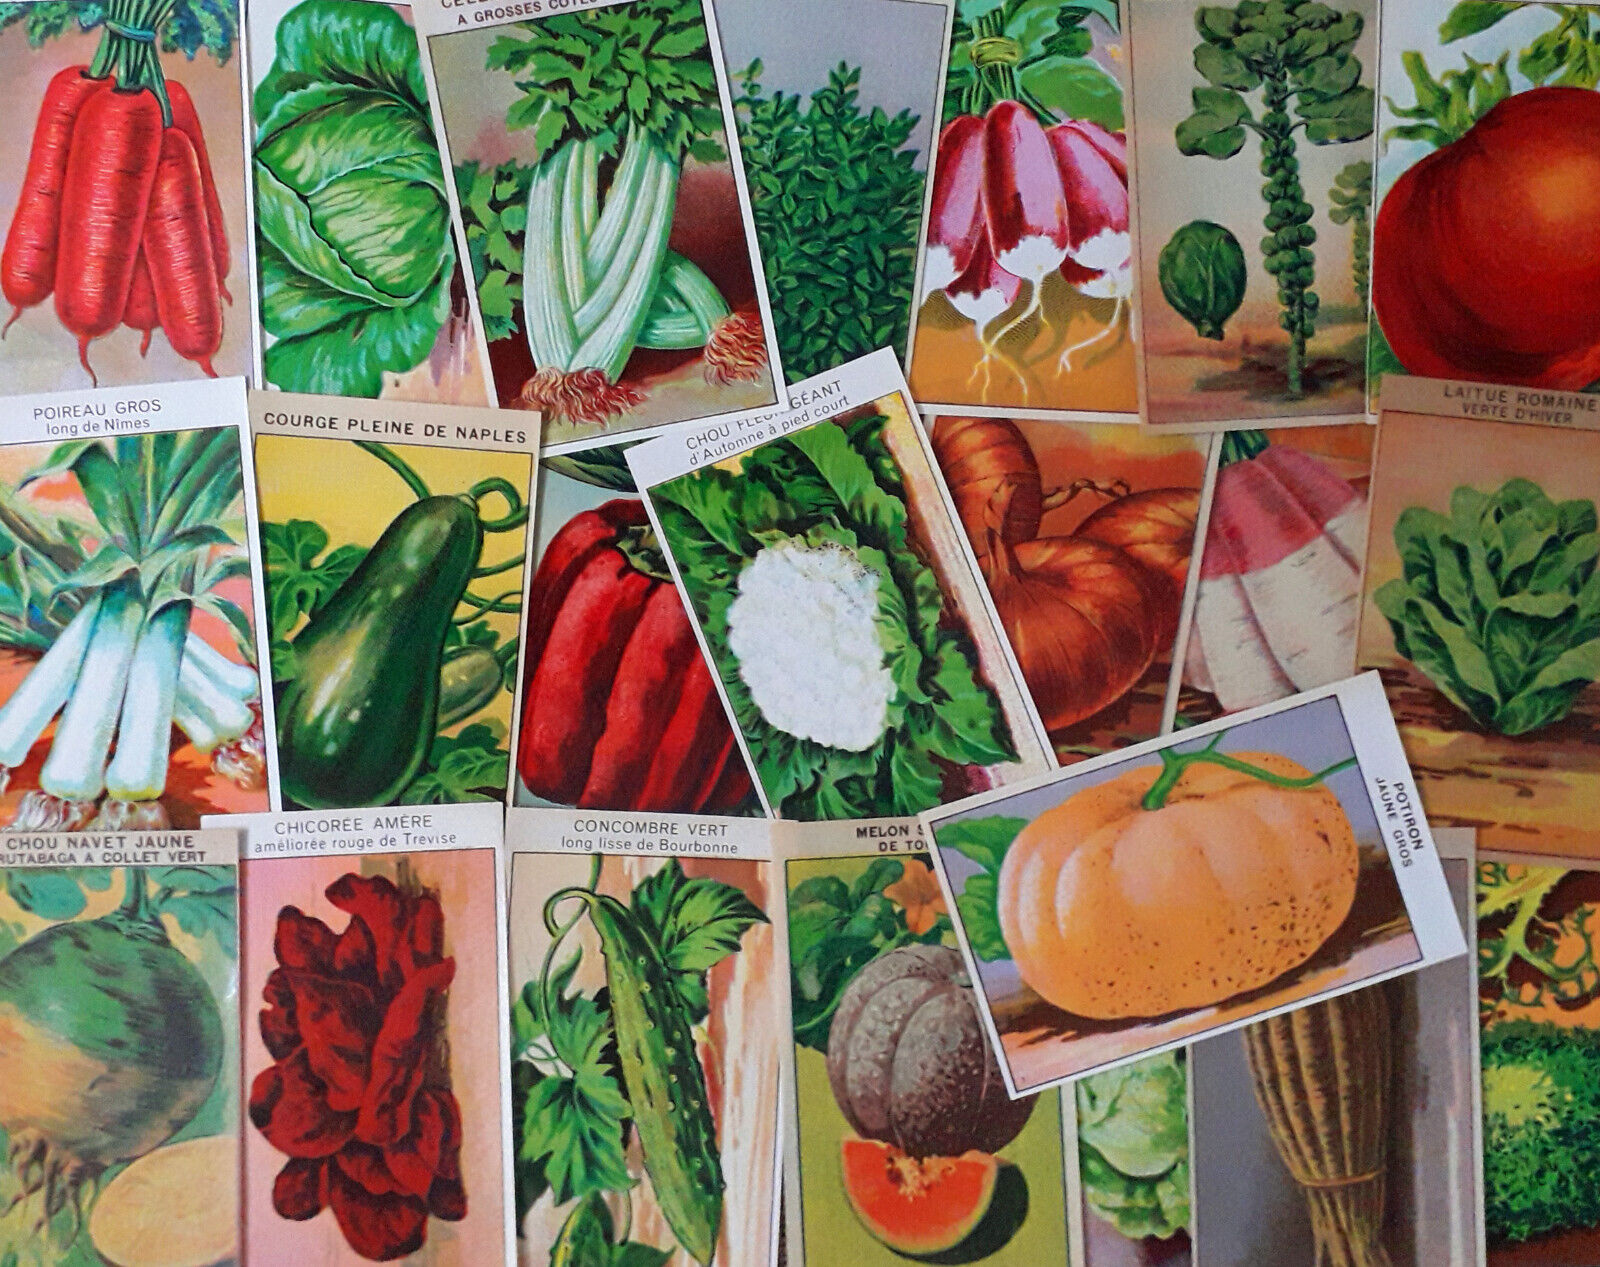 72 Vintage French VEGETABLE Seed Packet Labels lithograph printed in 1920s